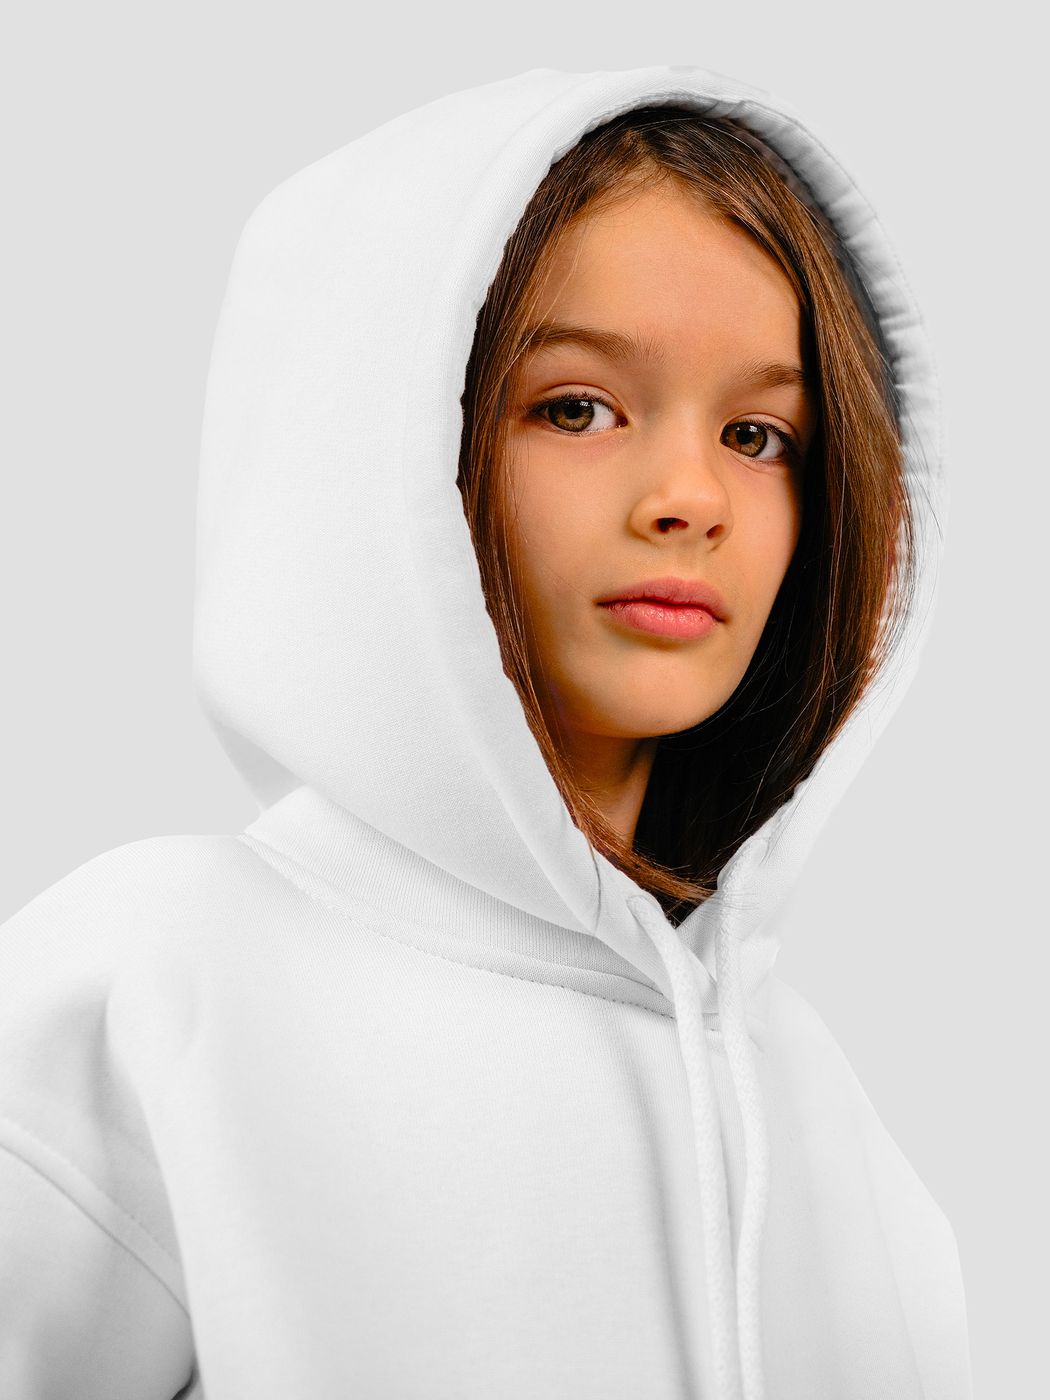 Kid's suit hoodie and pants white, White, 3XS (86-92 cm), 92